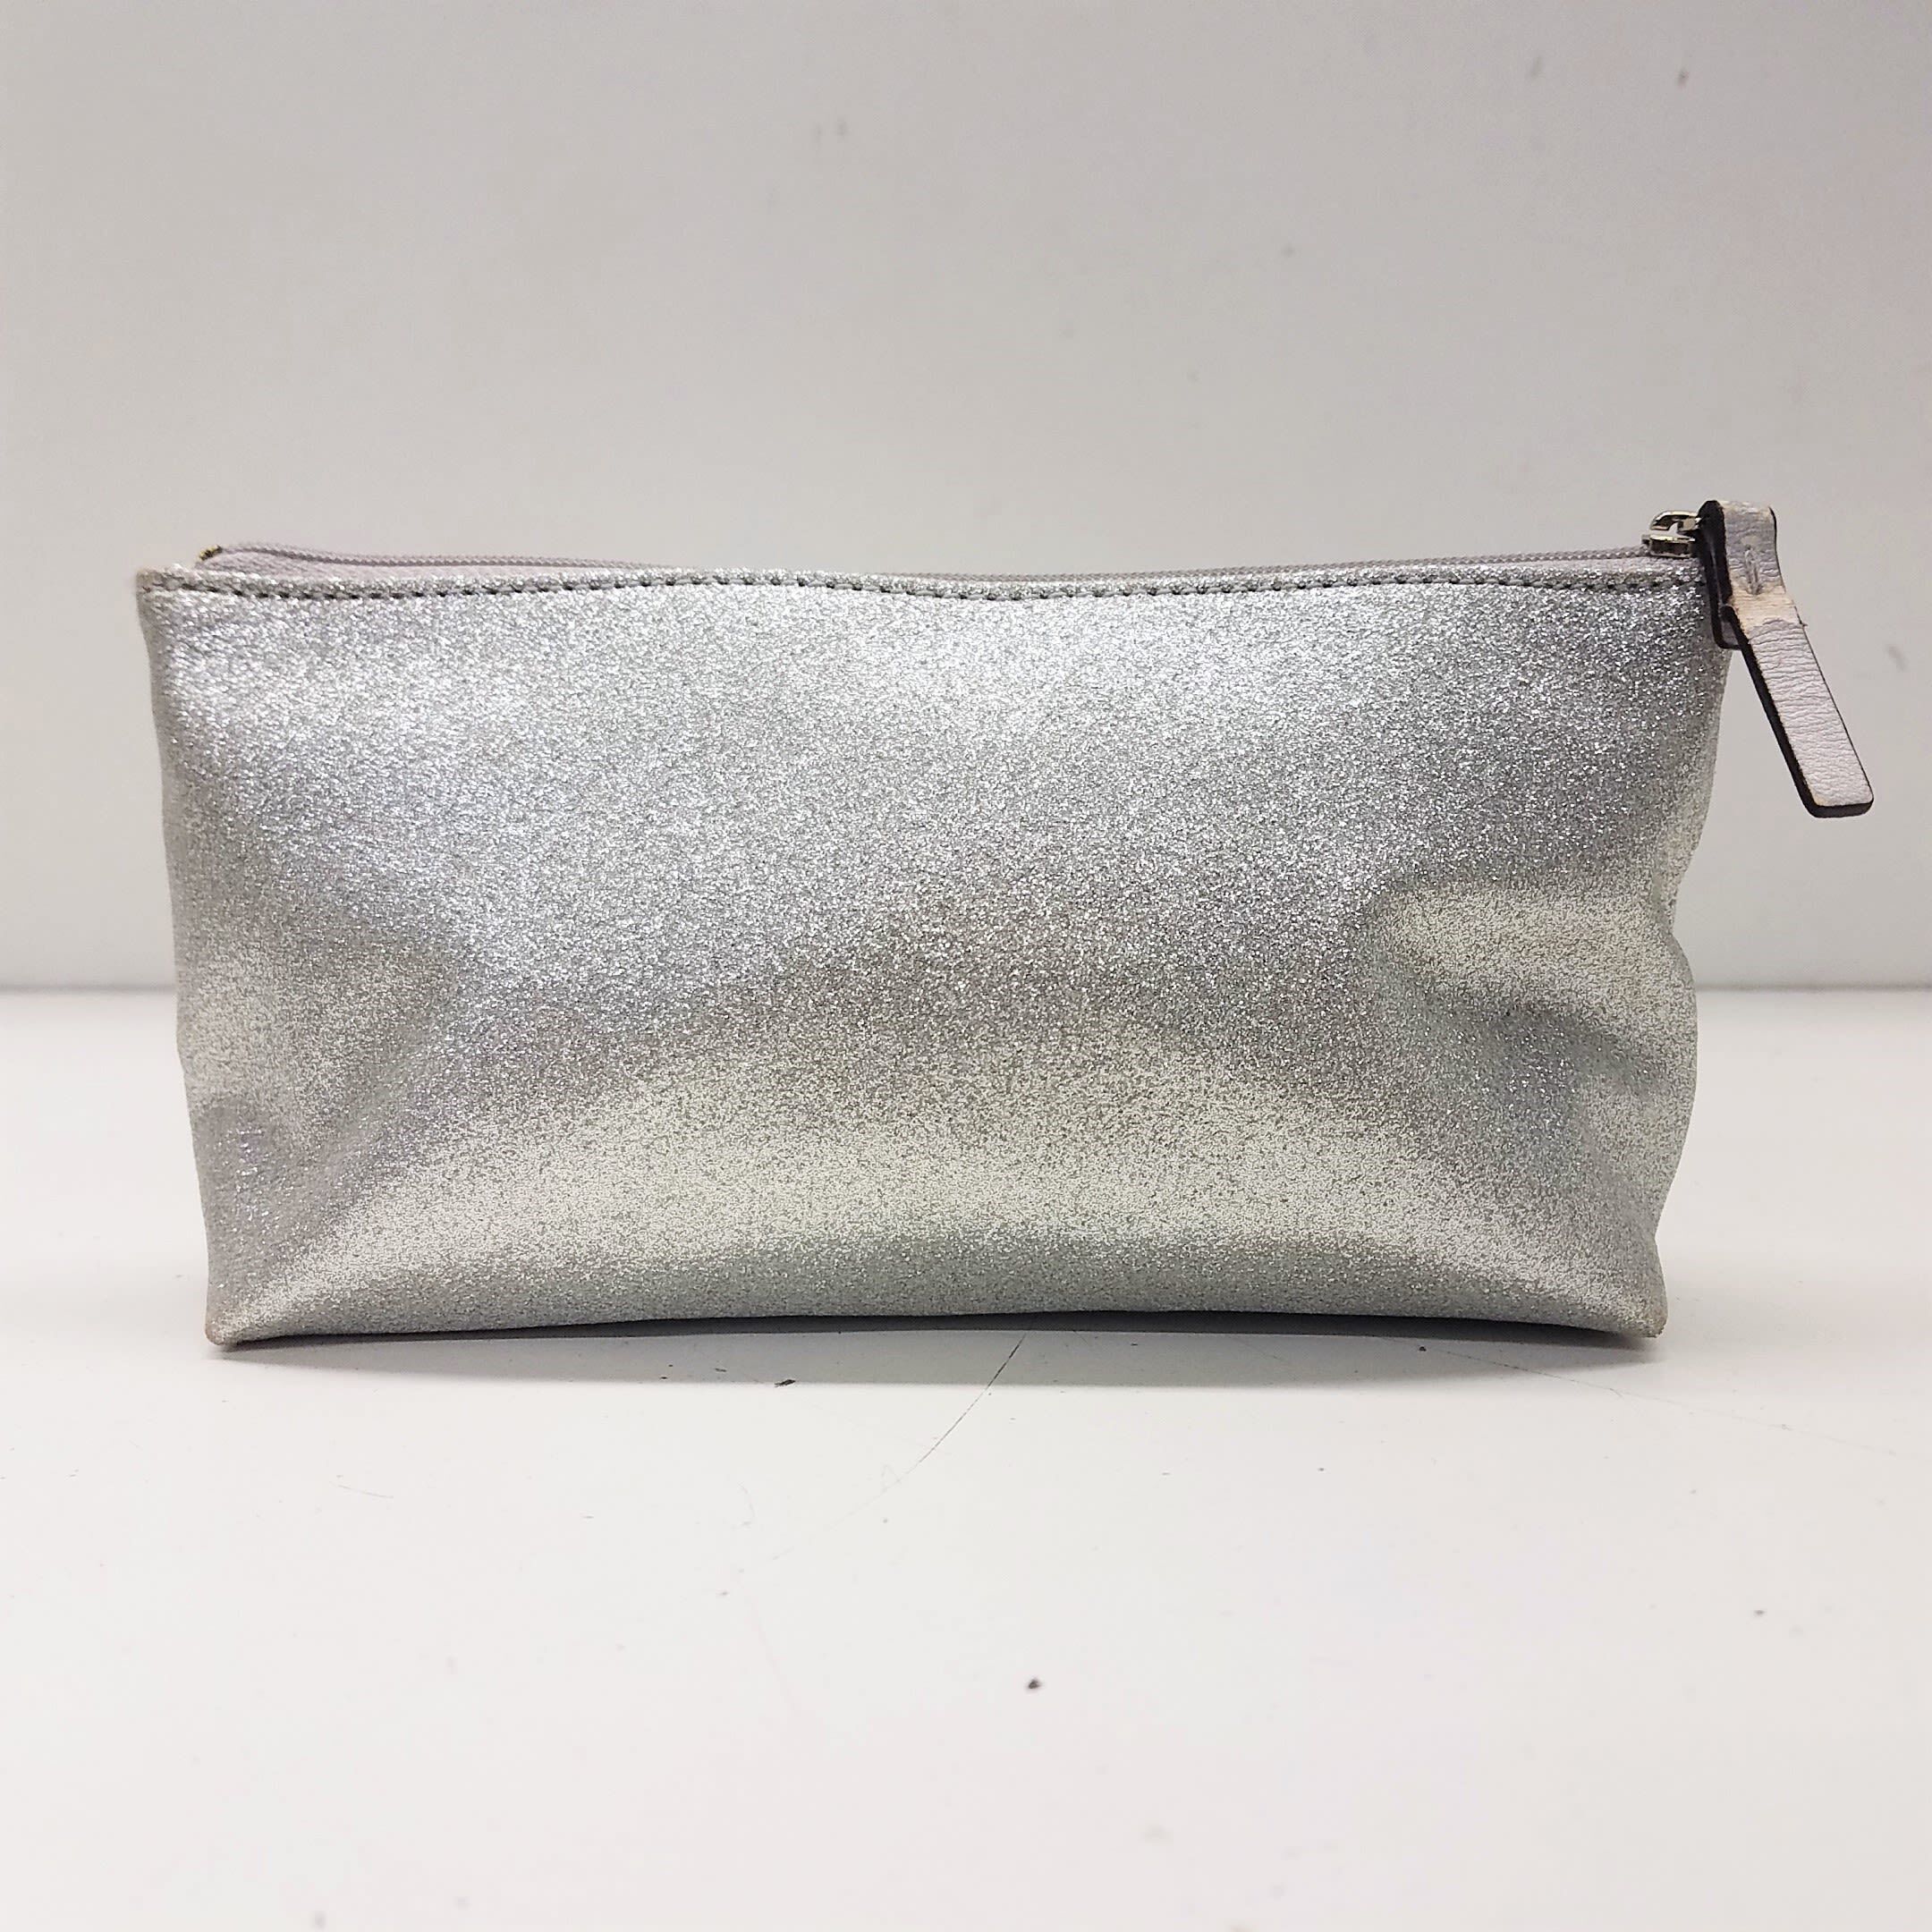 1950s-60s Silver Sparkle Small Evening Clutch Bag Purse, Metal Chain 8 x 5